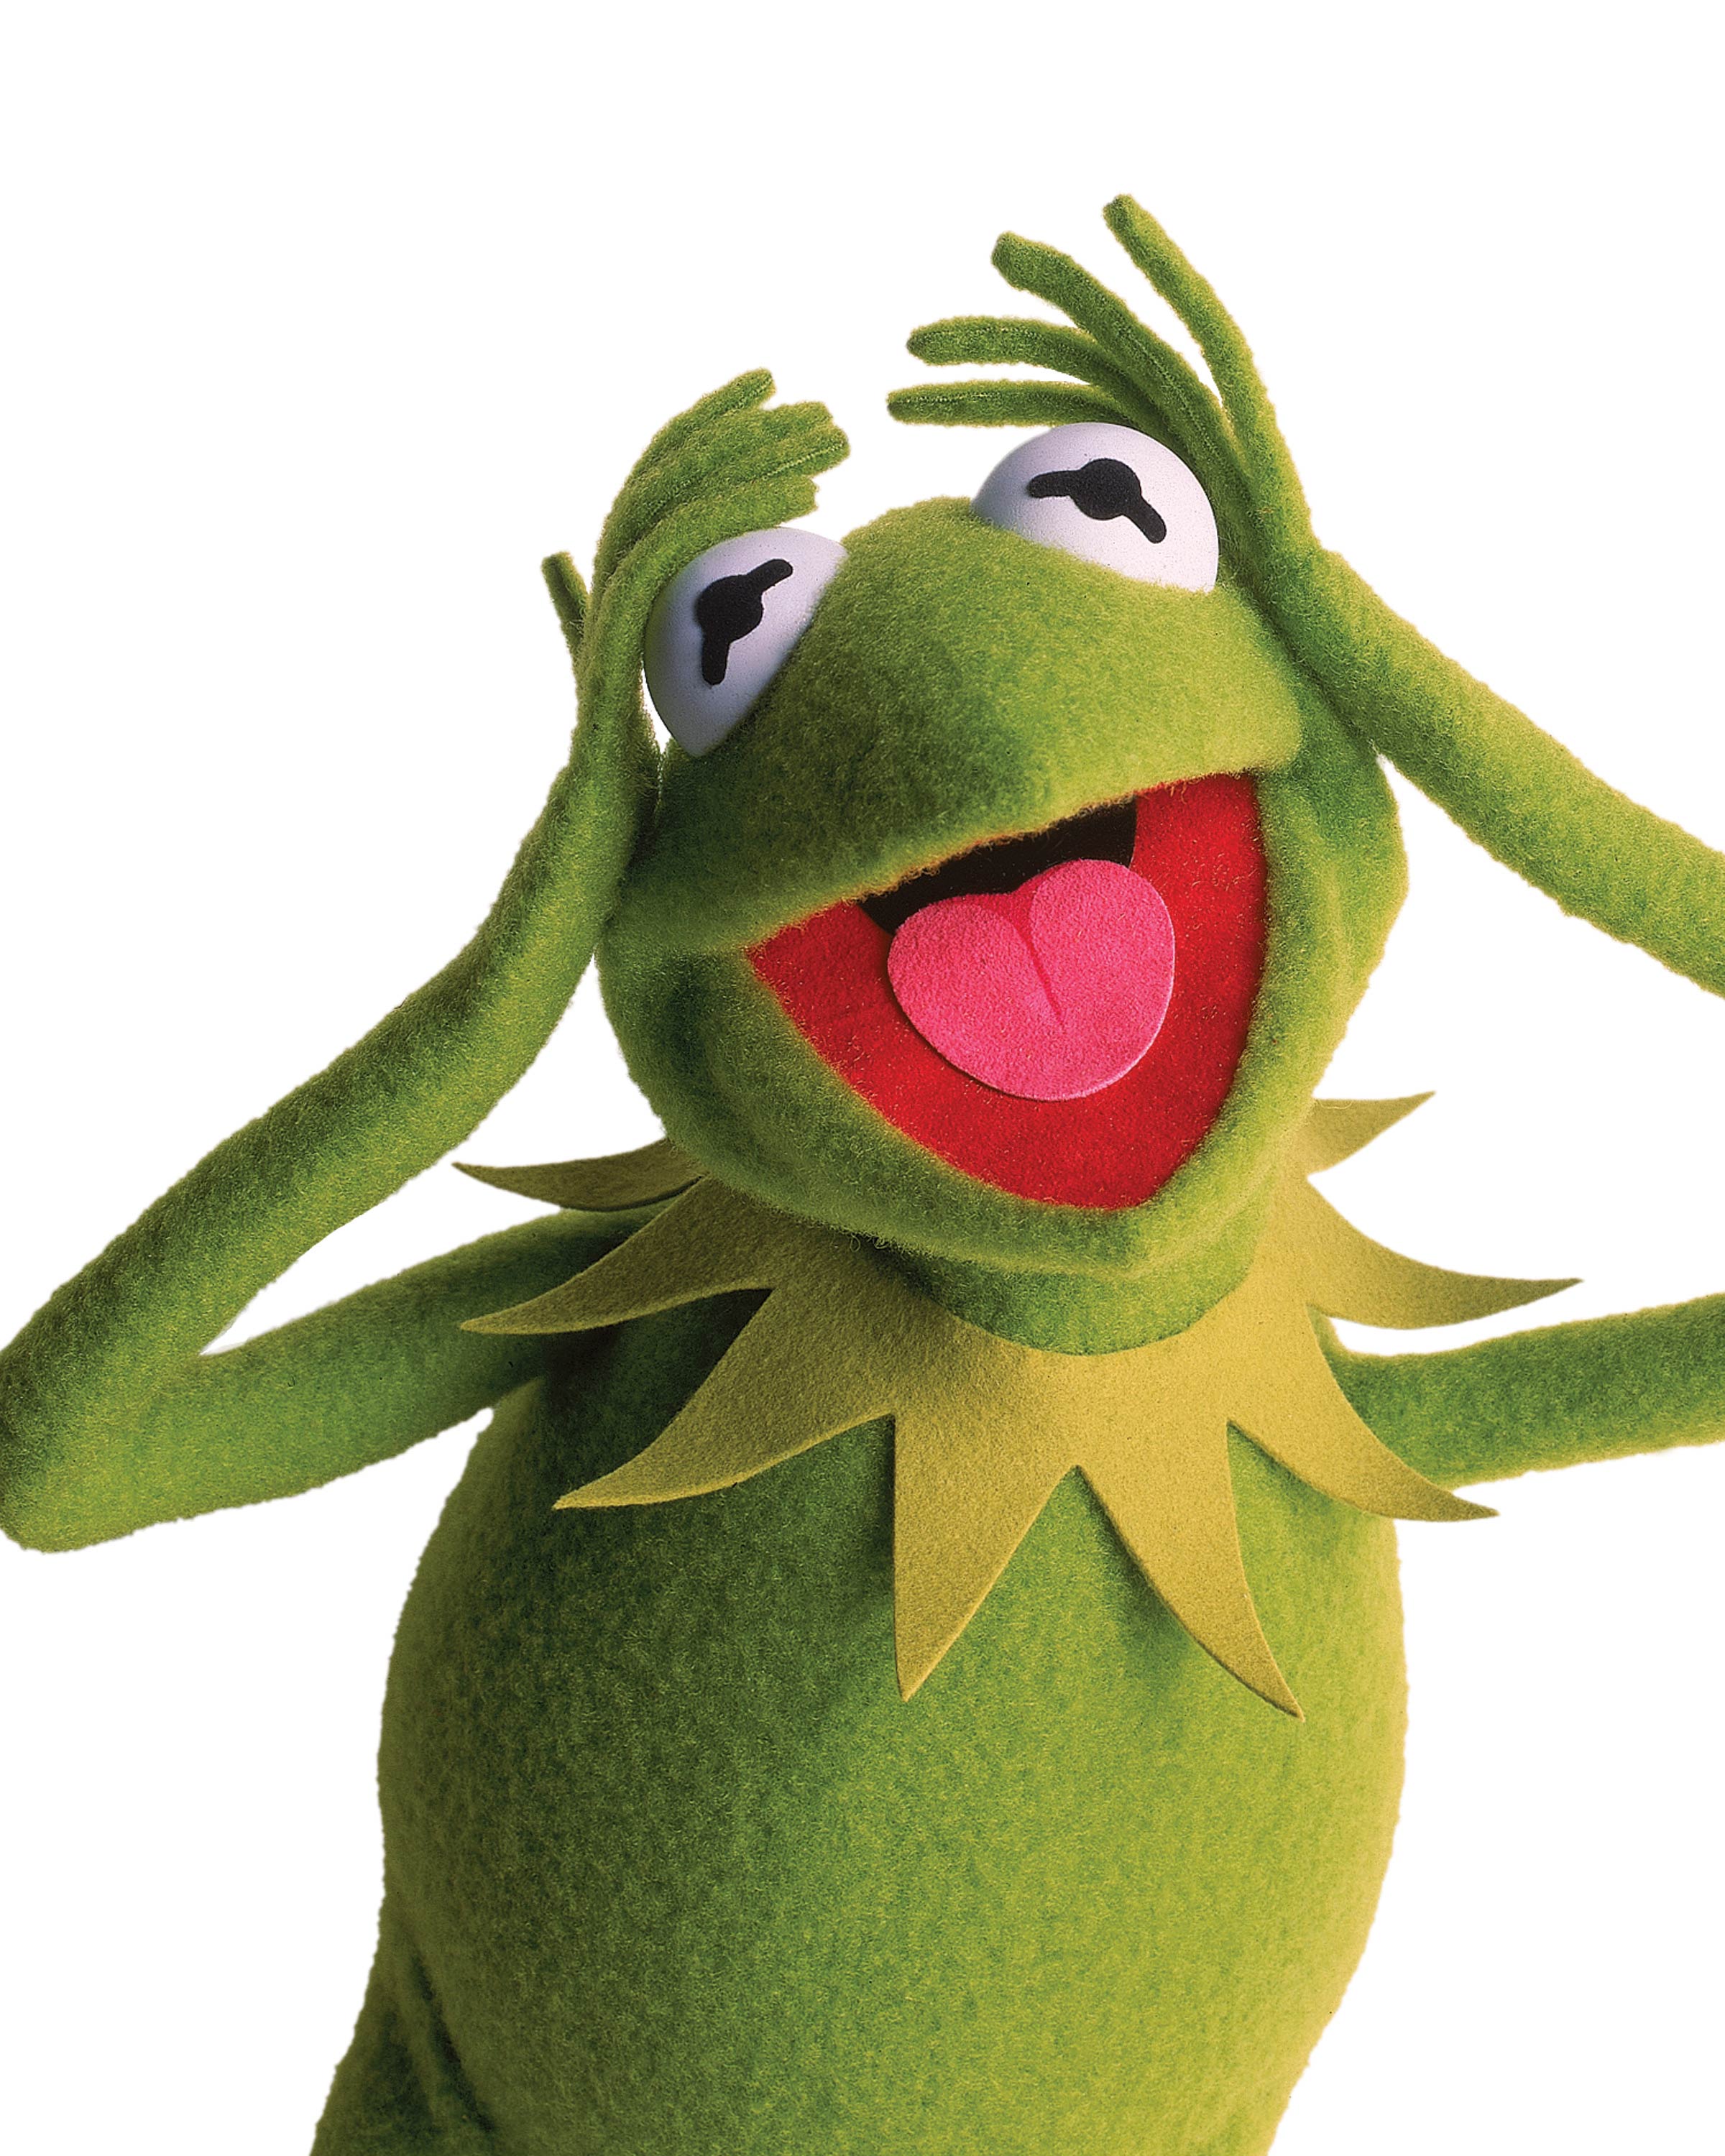 Kermit The Frog From The Muppets Wallpaper - Kermit The Frog , HD Wallpaper & Backgrounds